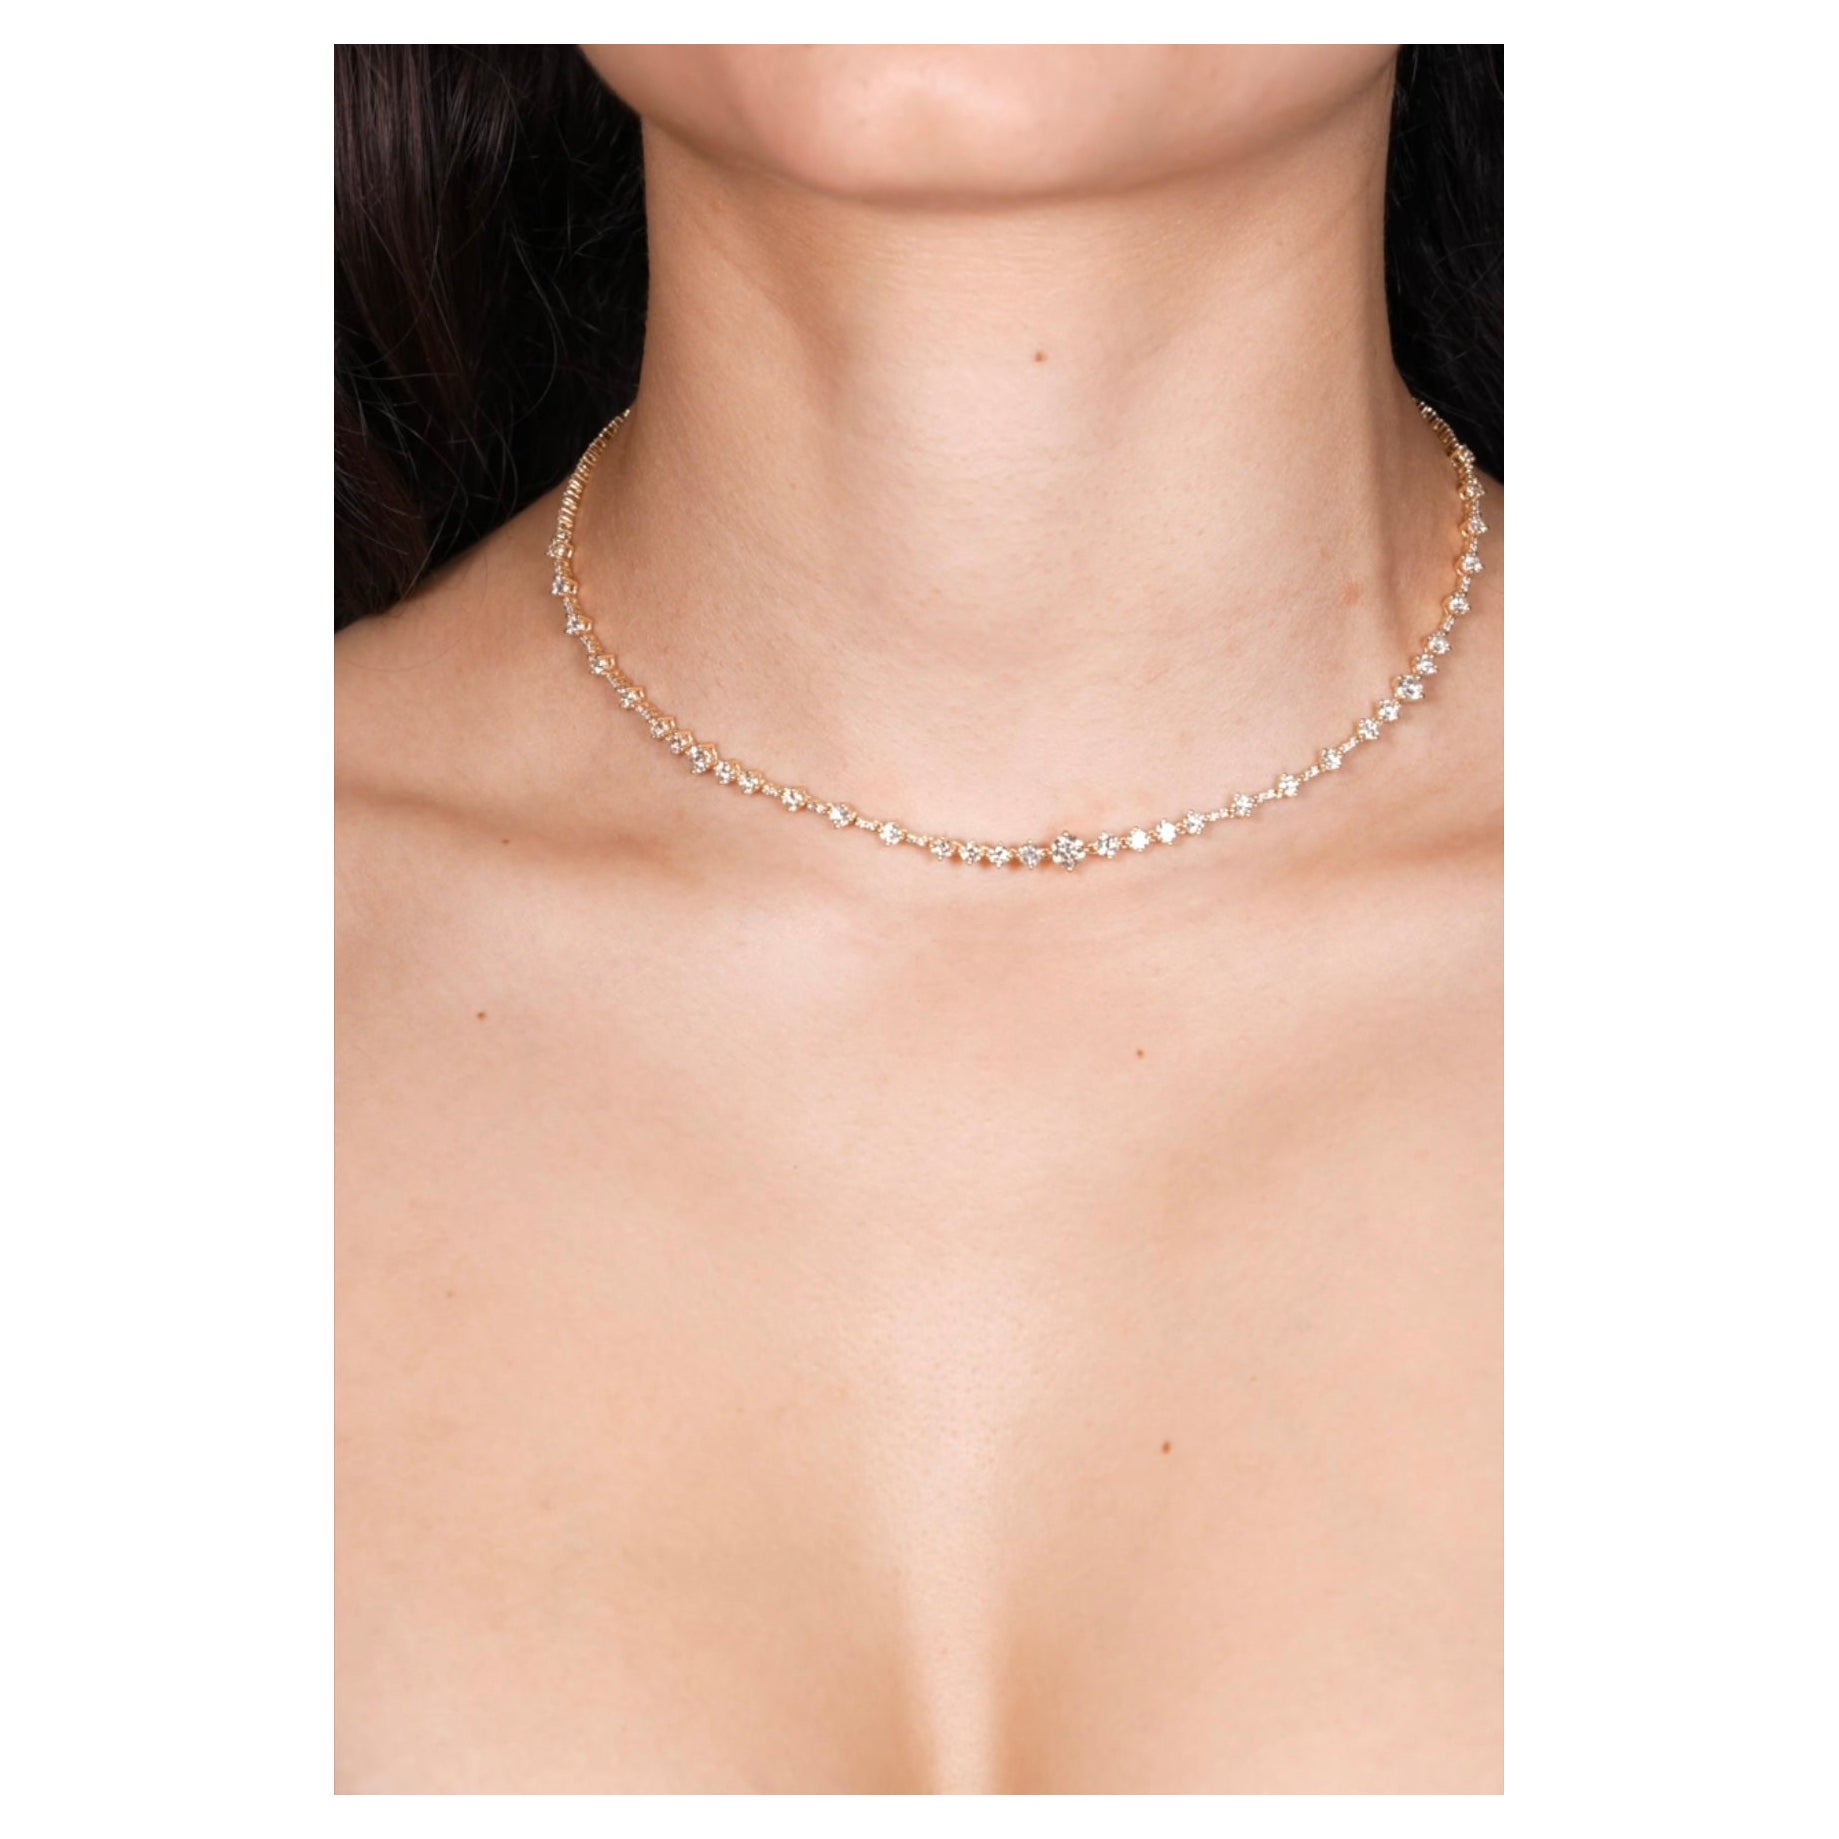 Ounce Collection Jewelry Choker Necklaces